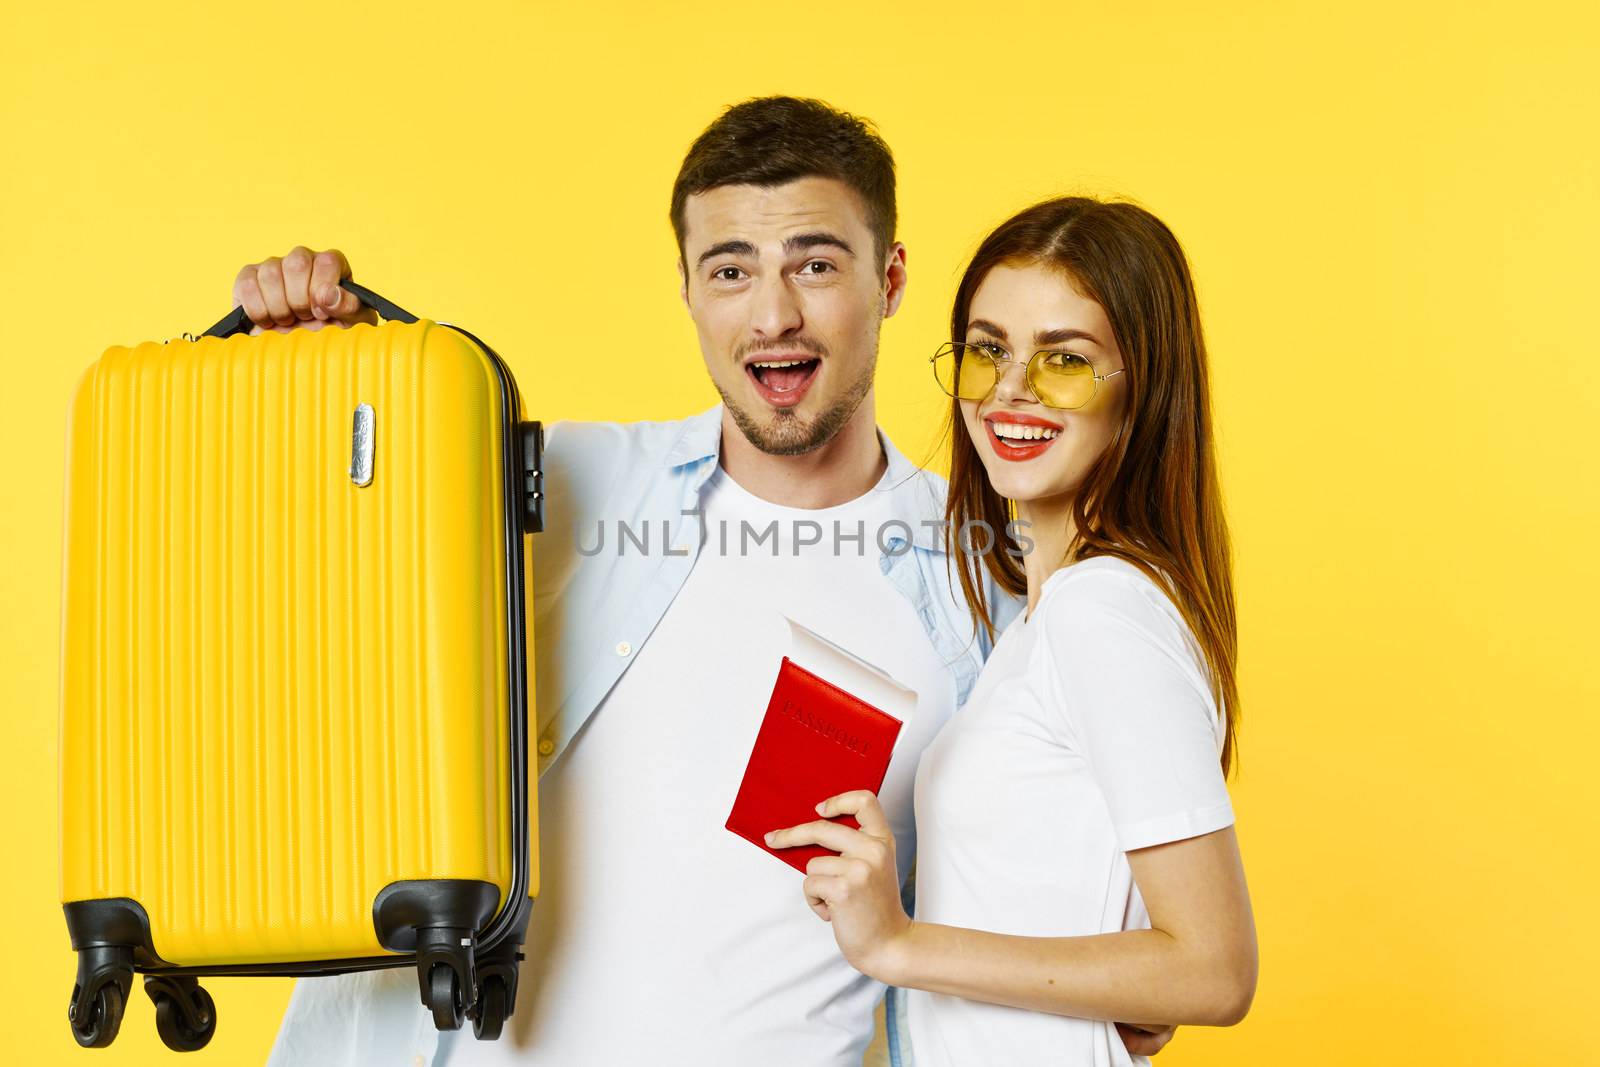 A woman with a passport and tickets is standing next to a man with a suitcase traveling tourism